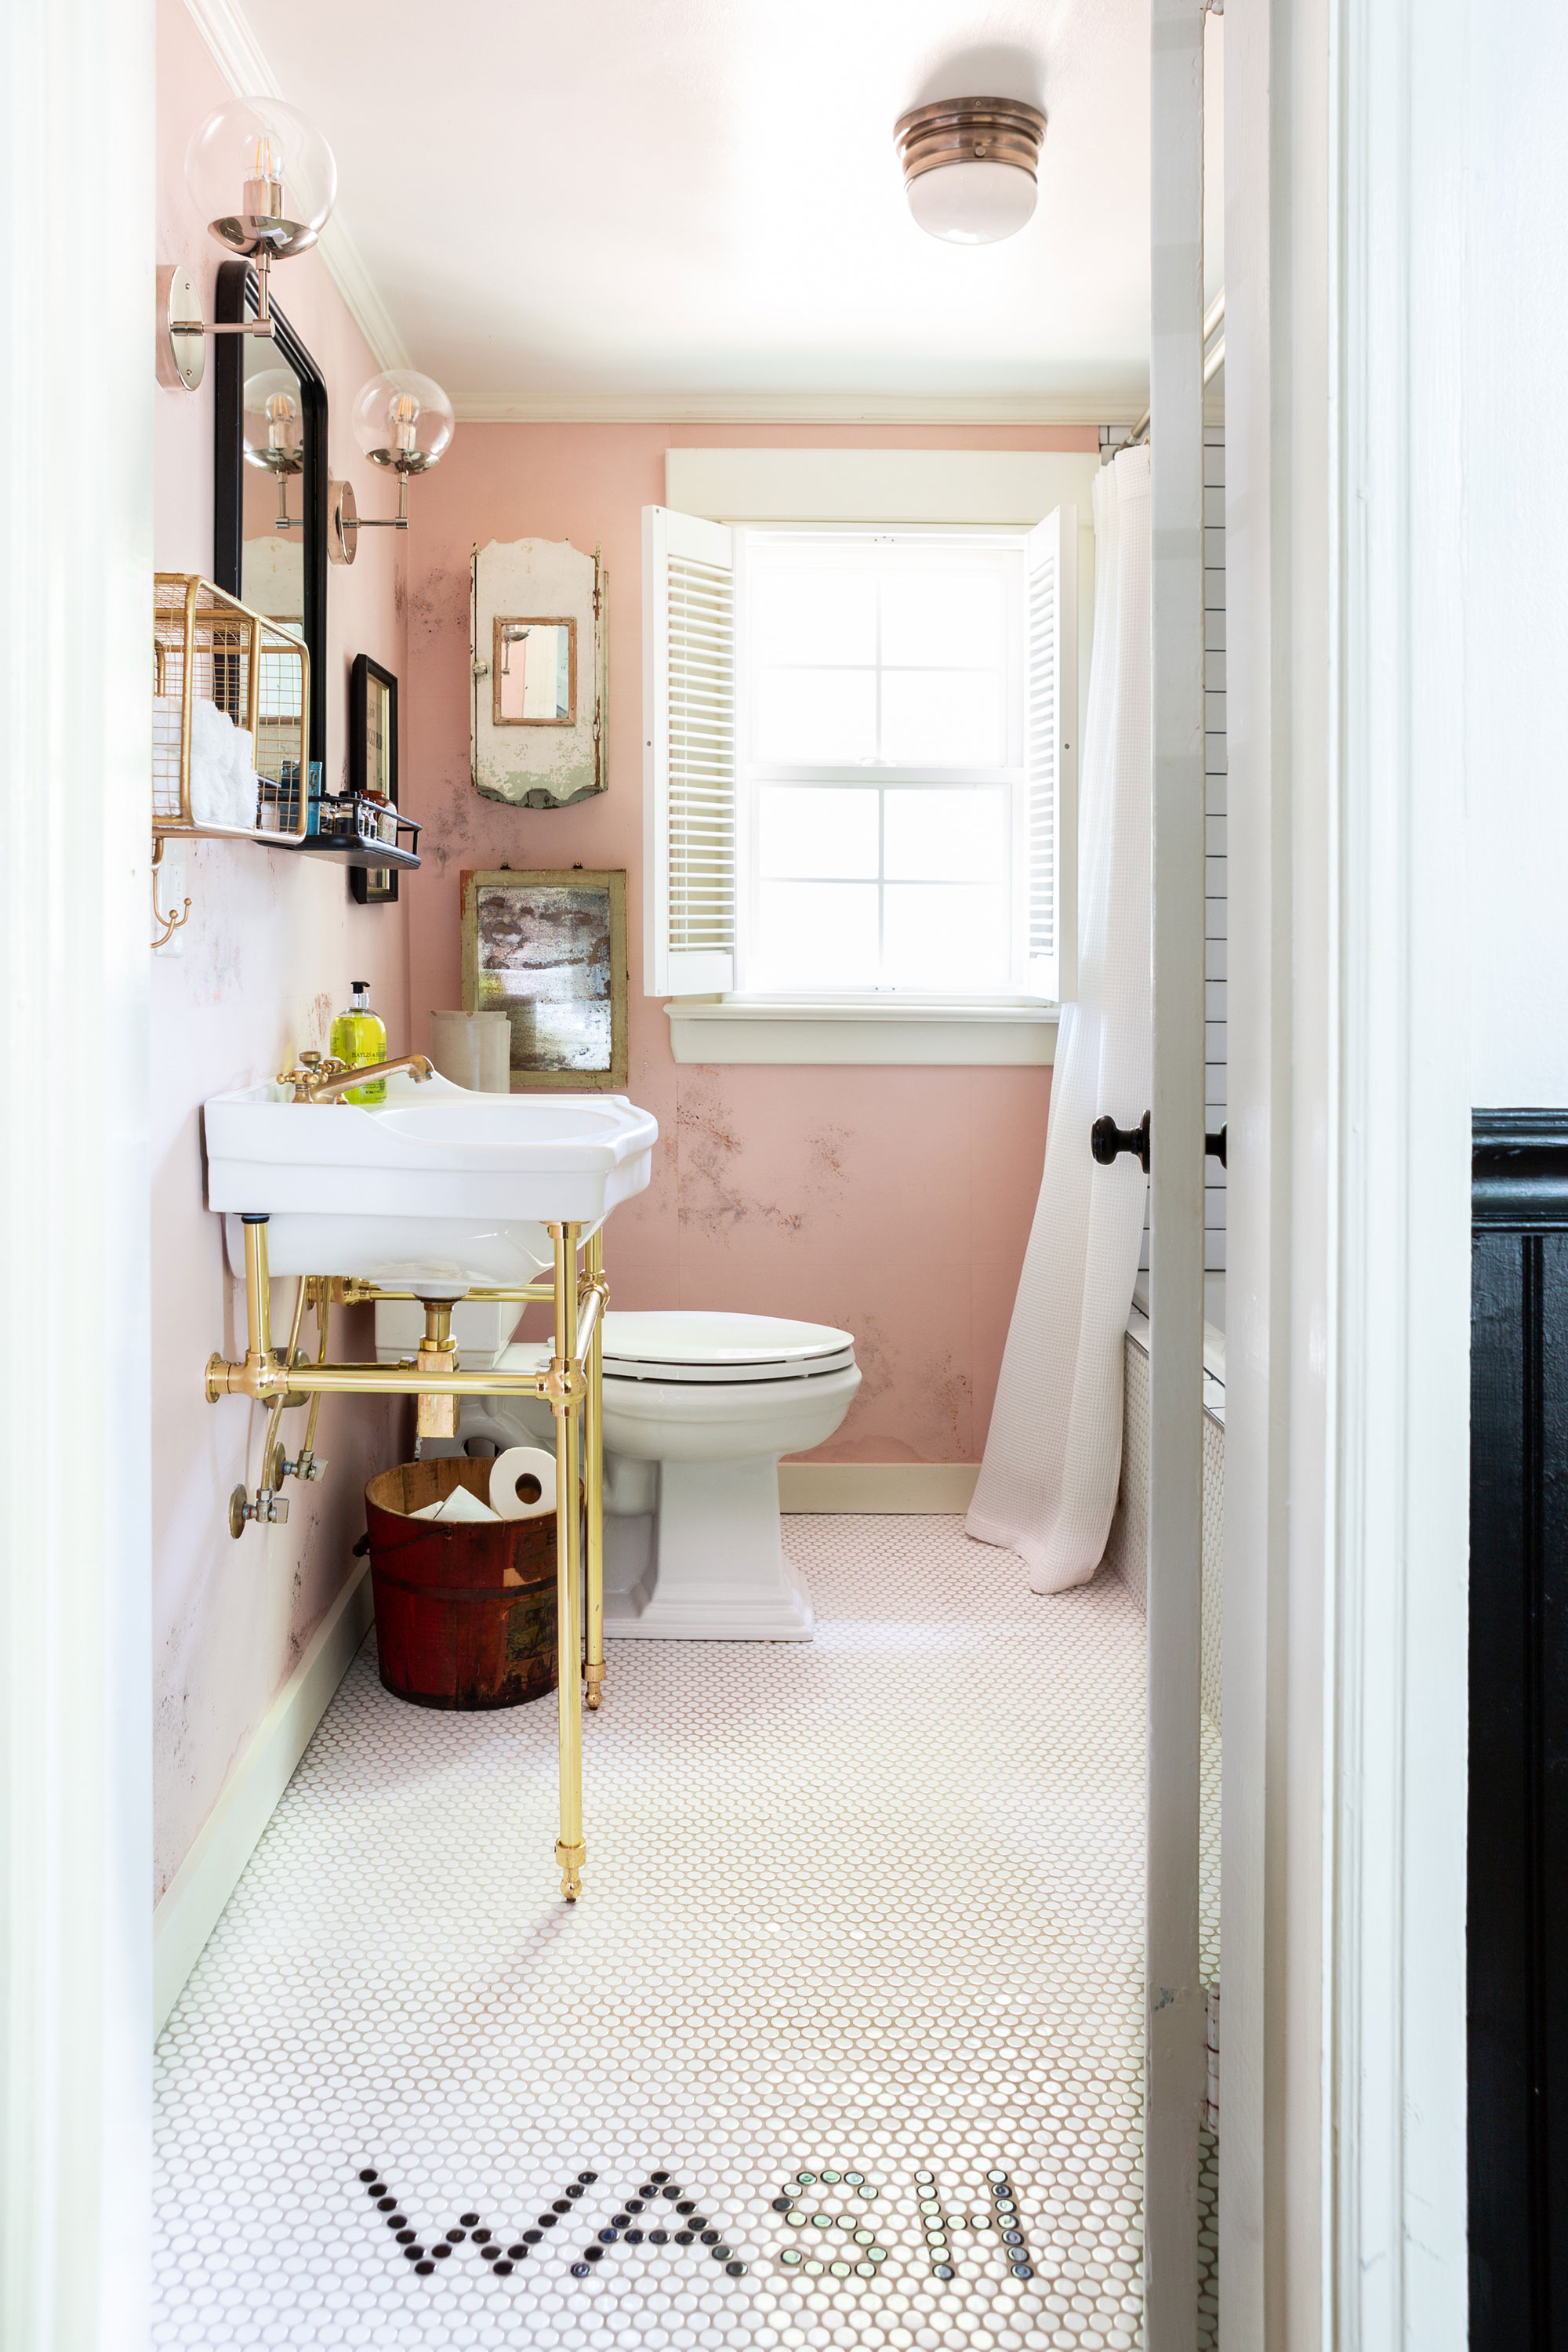 “No Southern home is complete without a stylish bathroom,” Holly says of her brassy, gold-on-pink design for the cottage’s renovated water closet. “There’s absolutely got to be a soaking tub, too.”